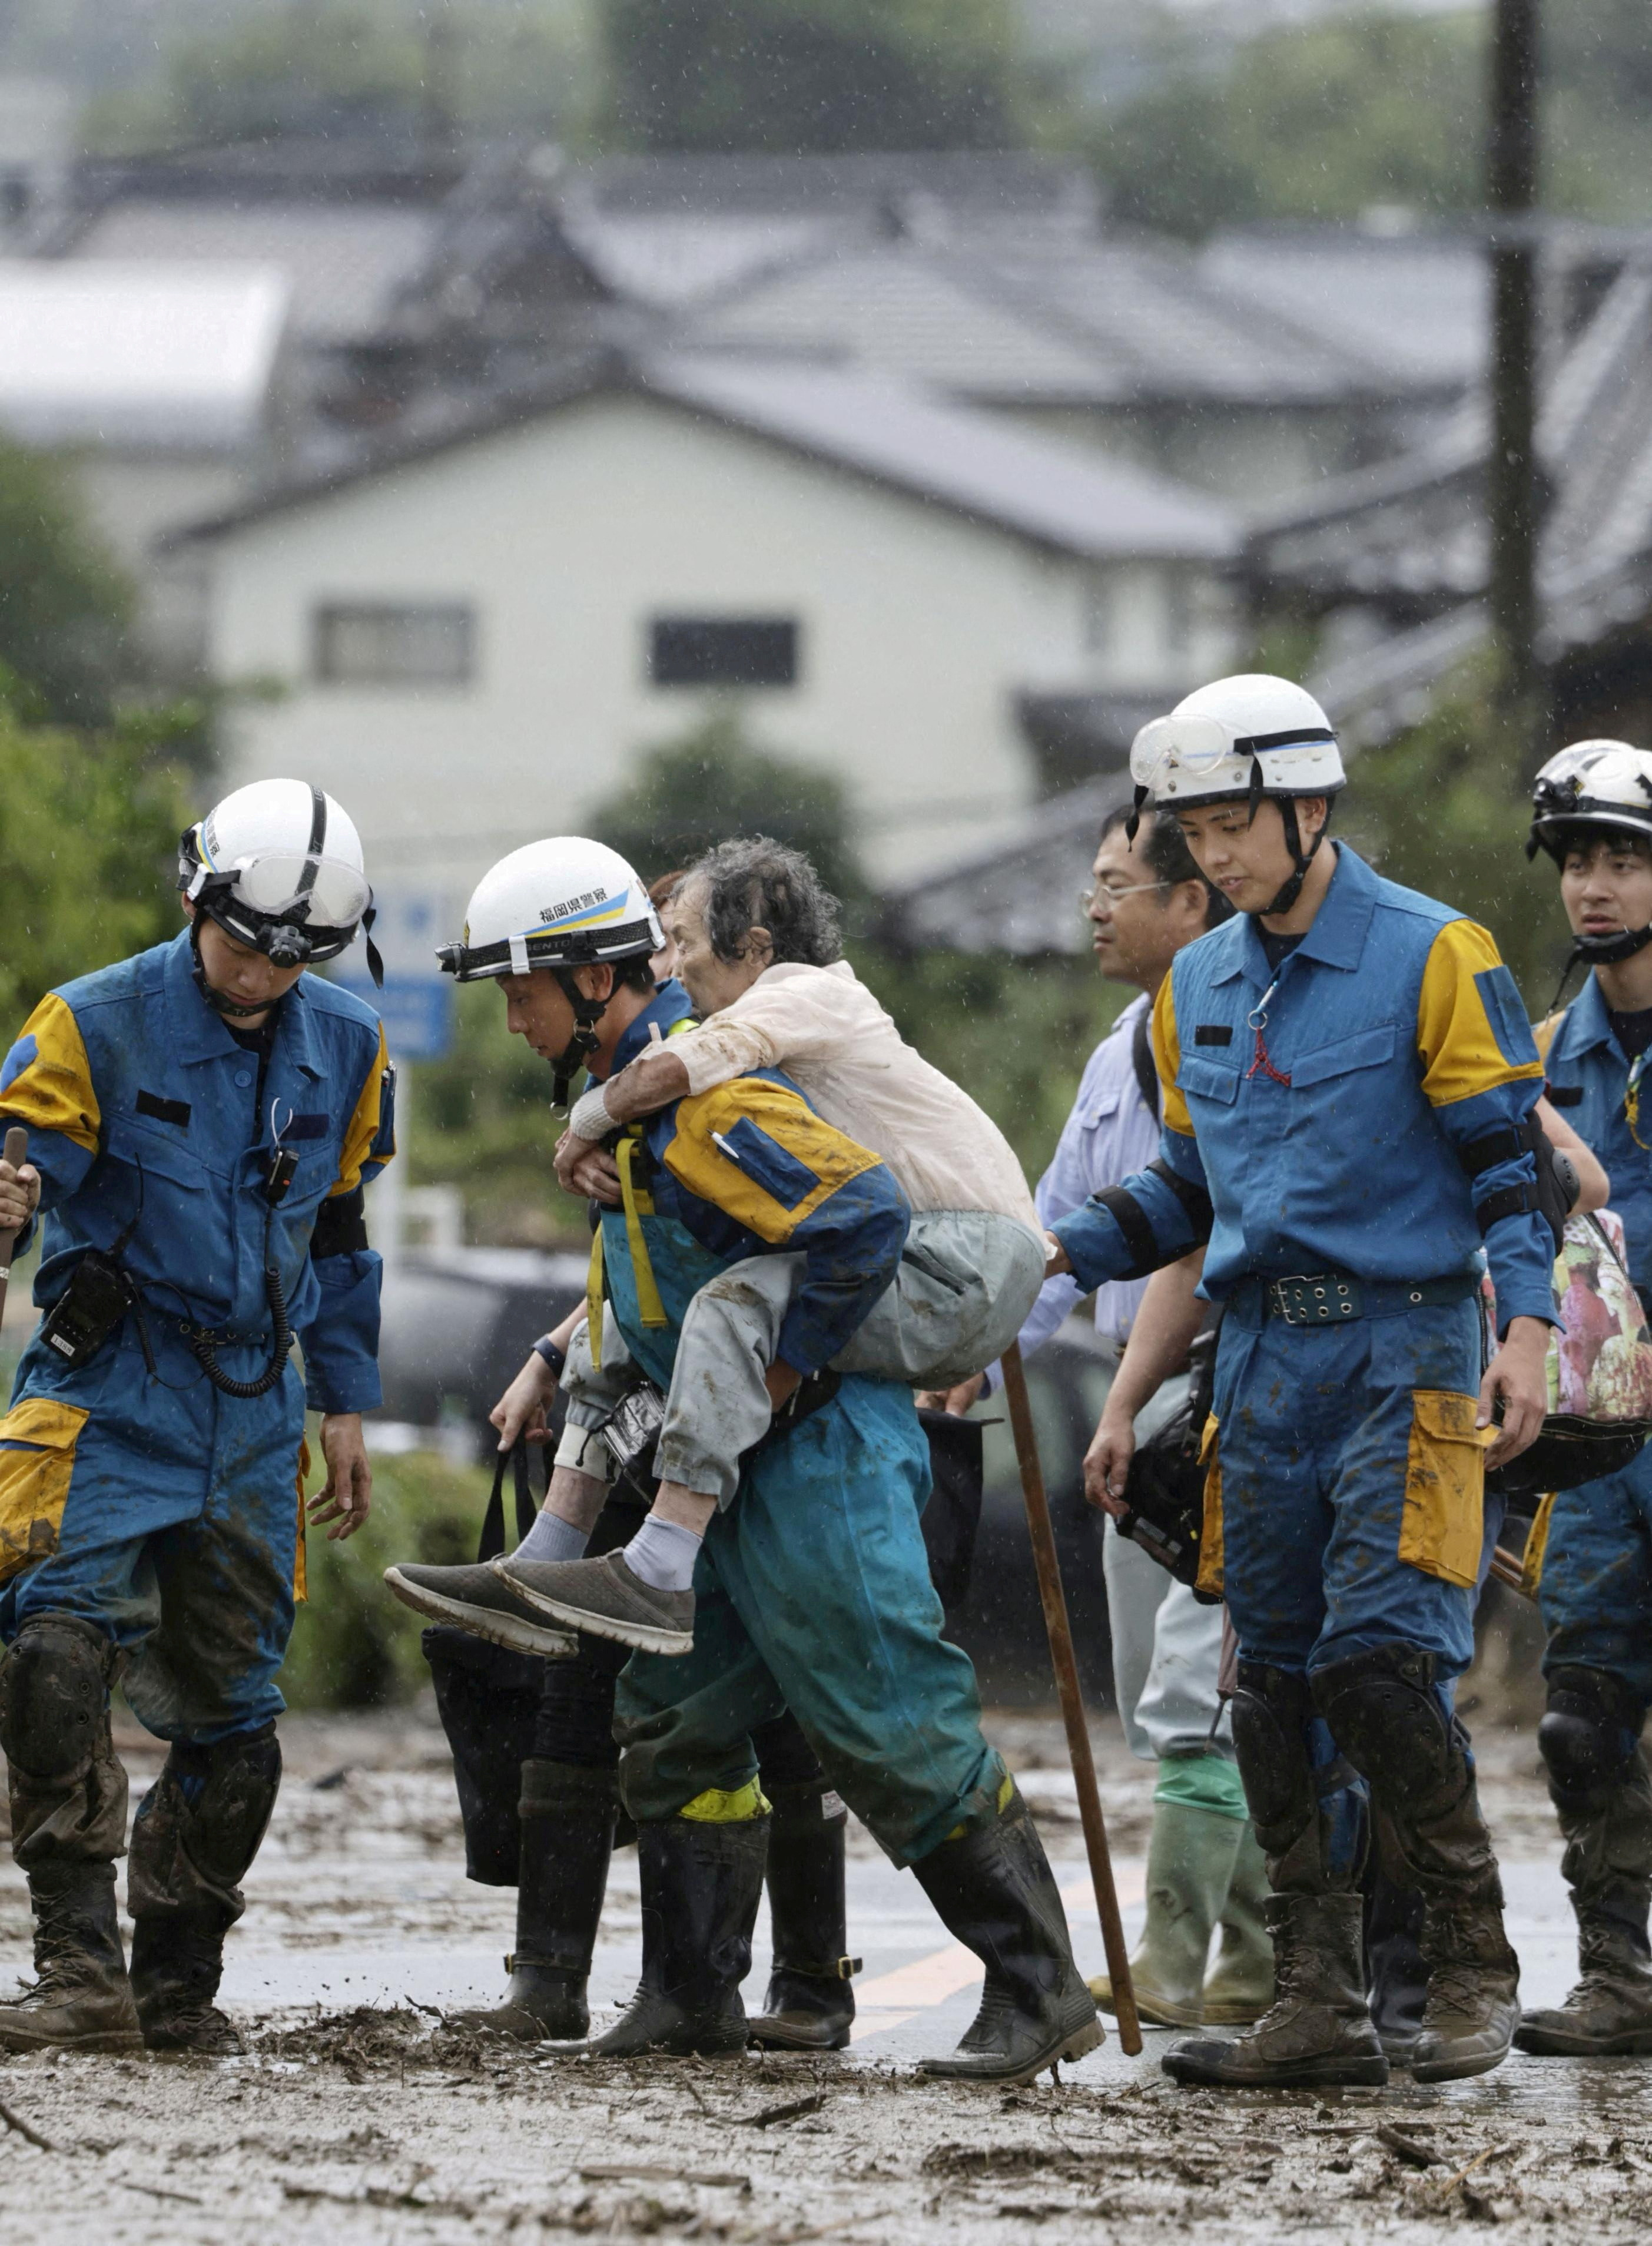 A police officer carries a person who is evacuated from a site of a landslide after the heavy rain in Kurume